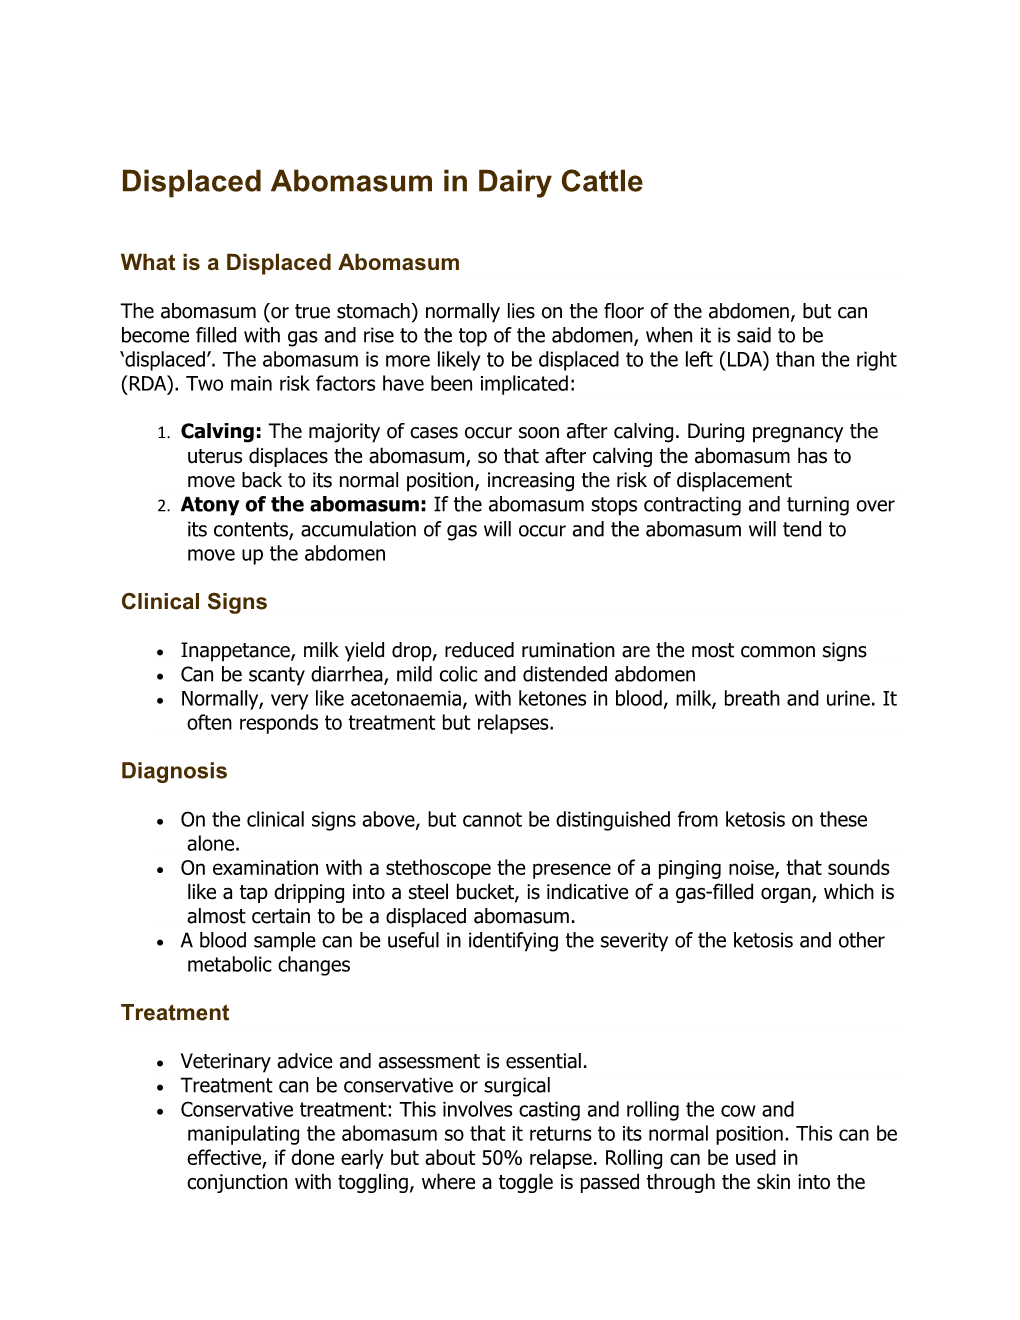 Displaced Abomasum in Dairy Cattle